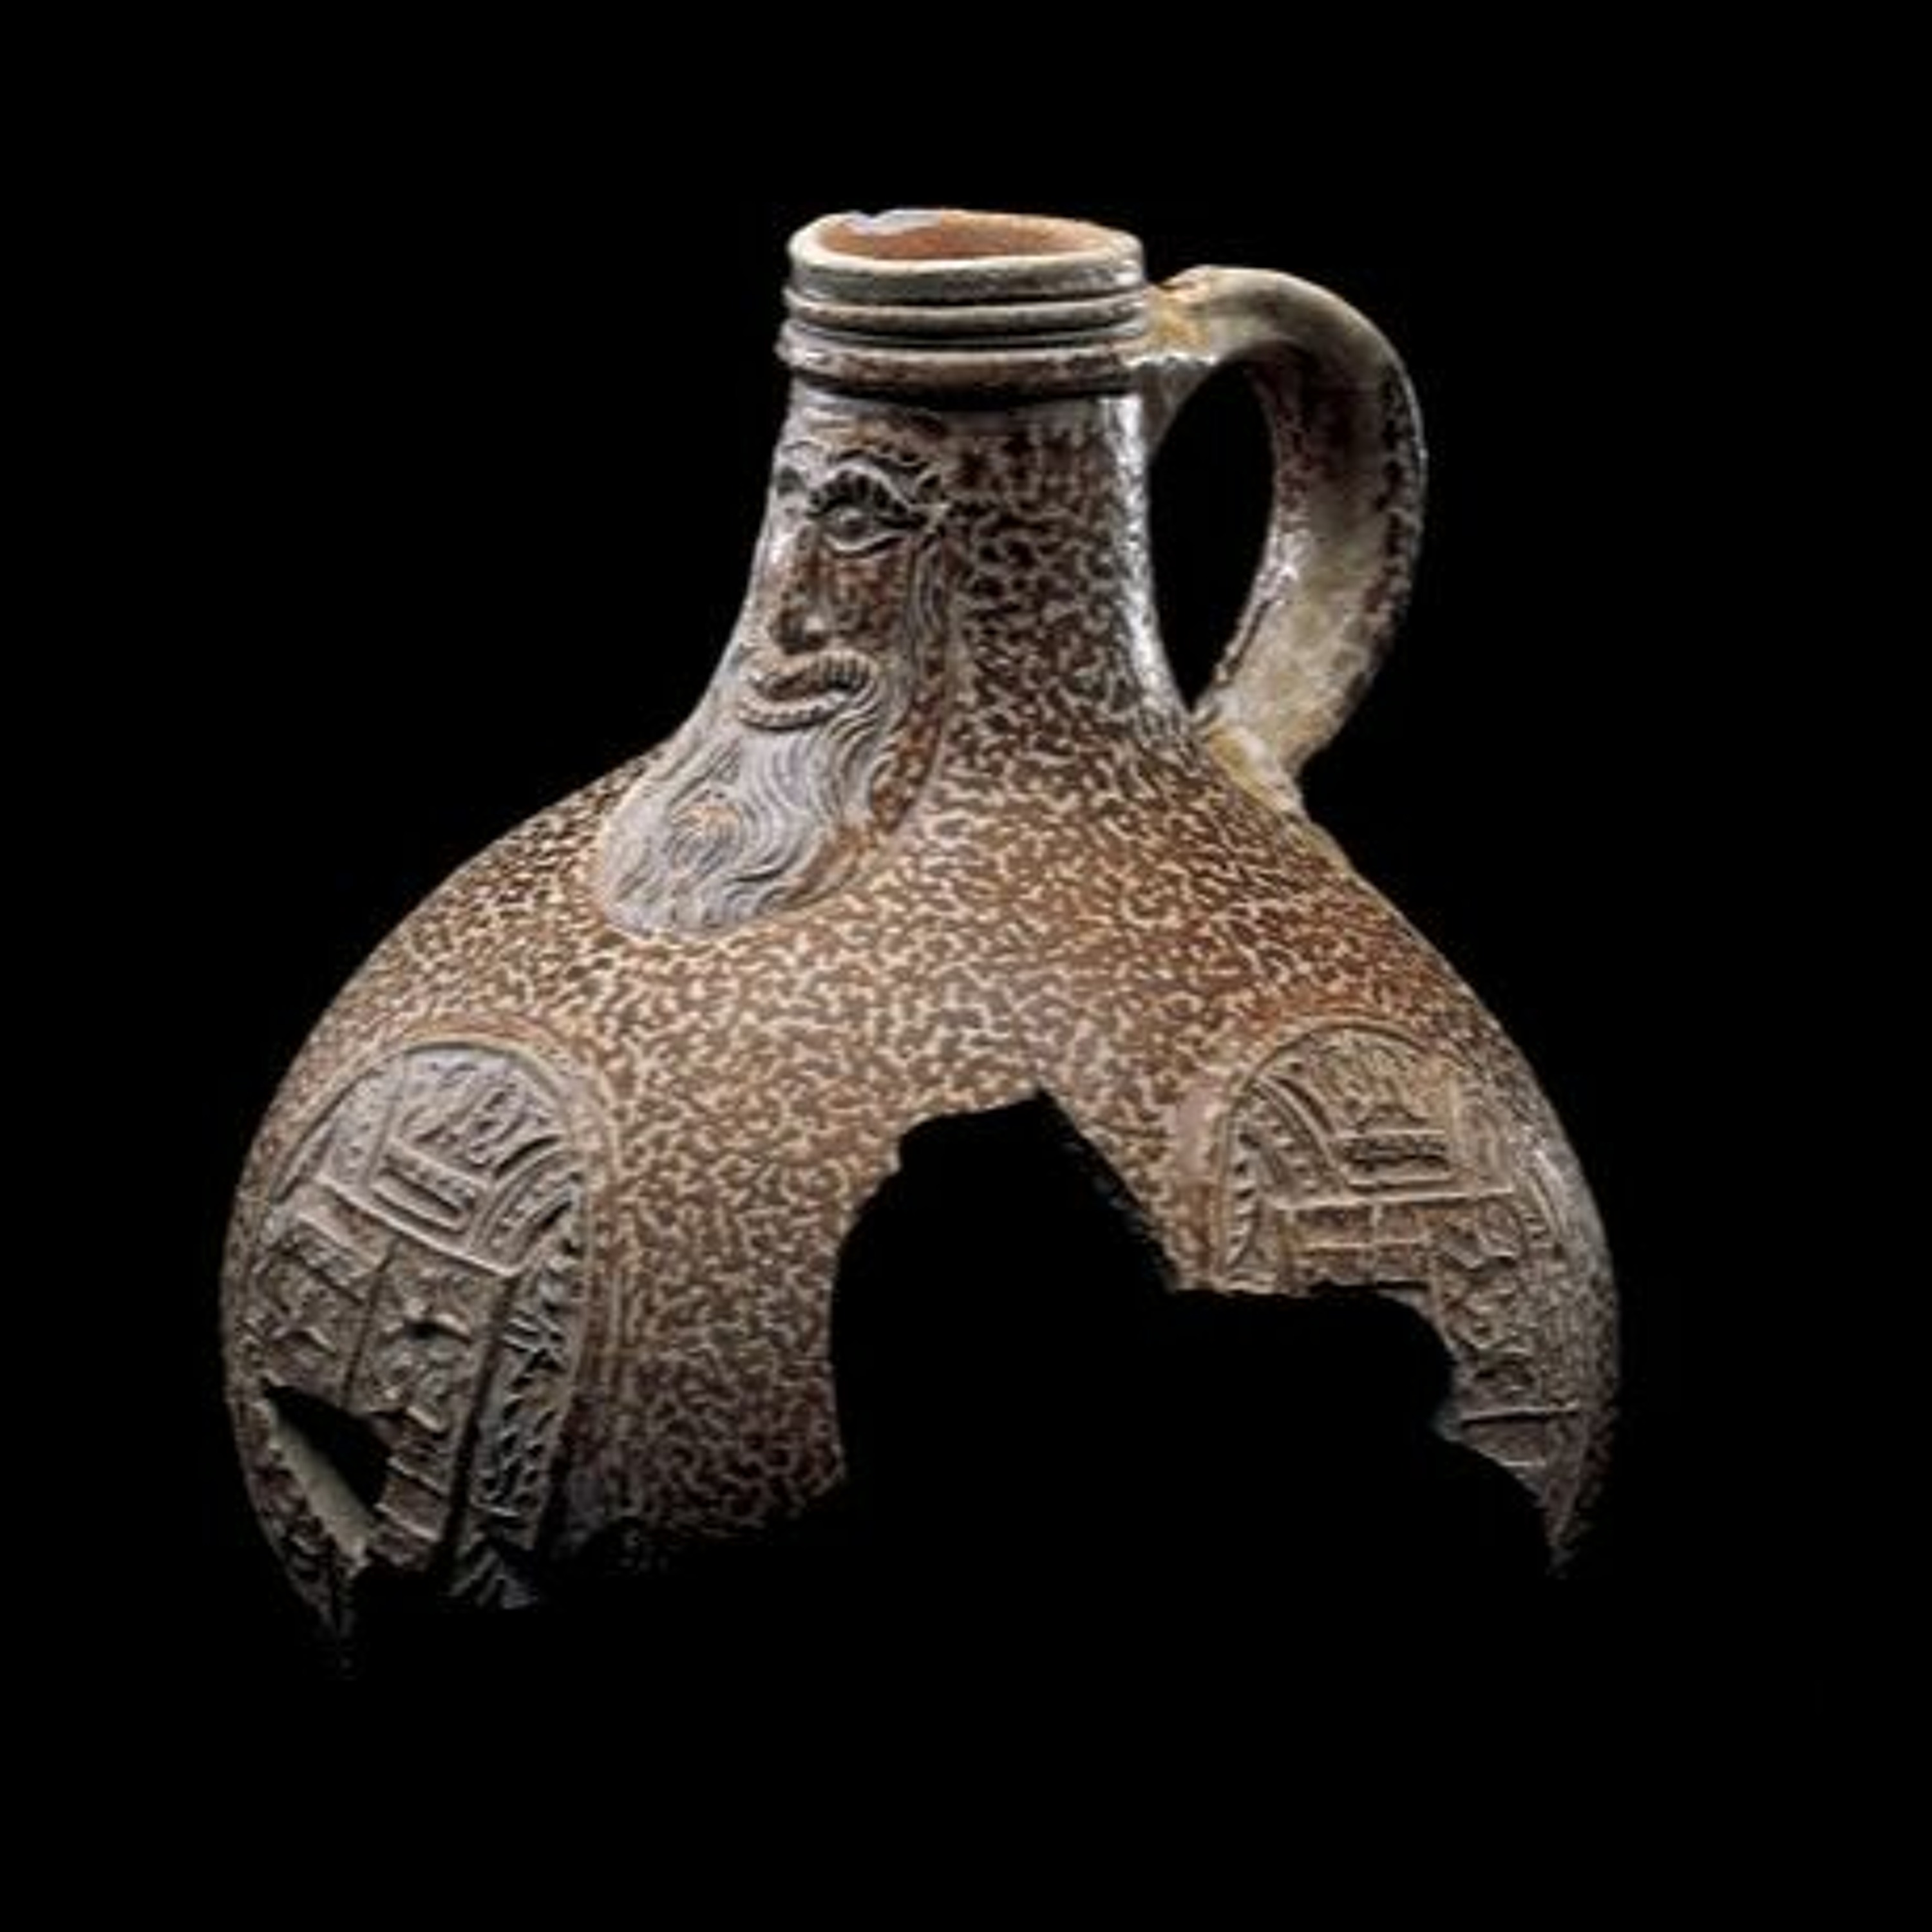 History of the United States in 100 Objects -- 9: Bartmann Jug with Guelph Coat-of-Arms, 1600-1610